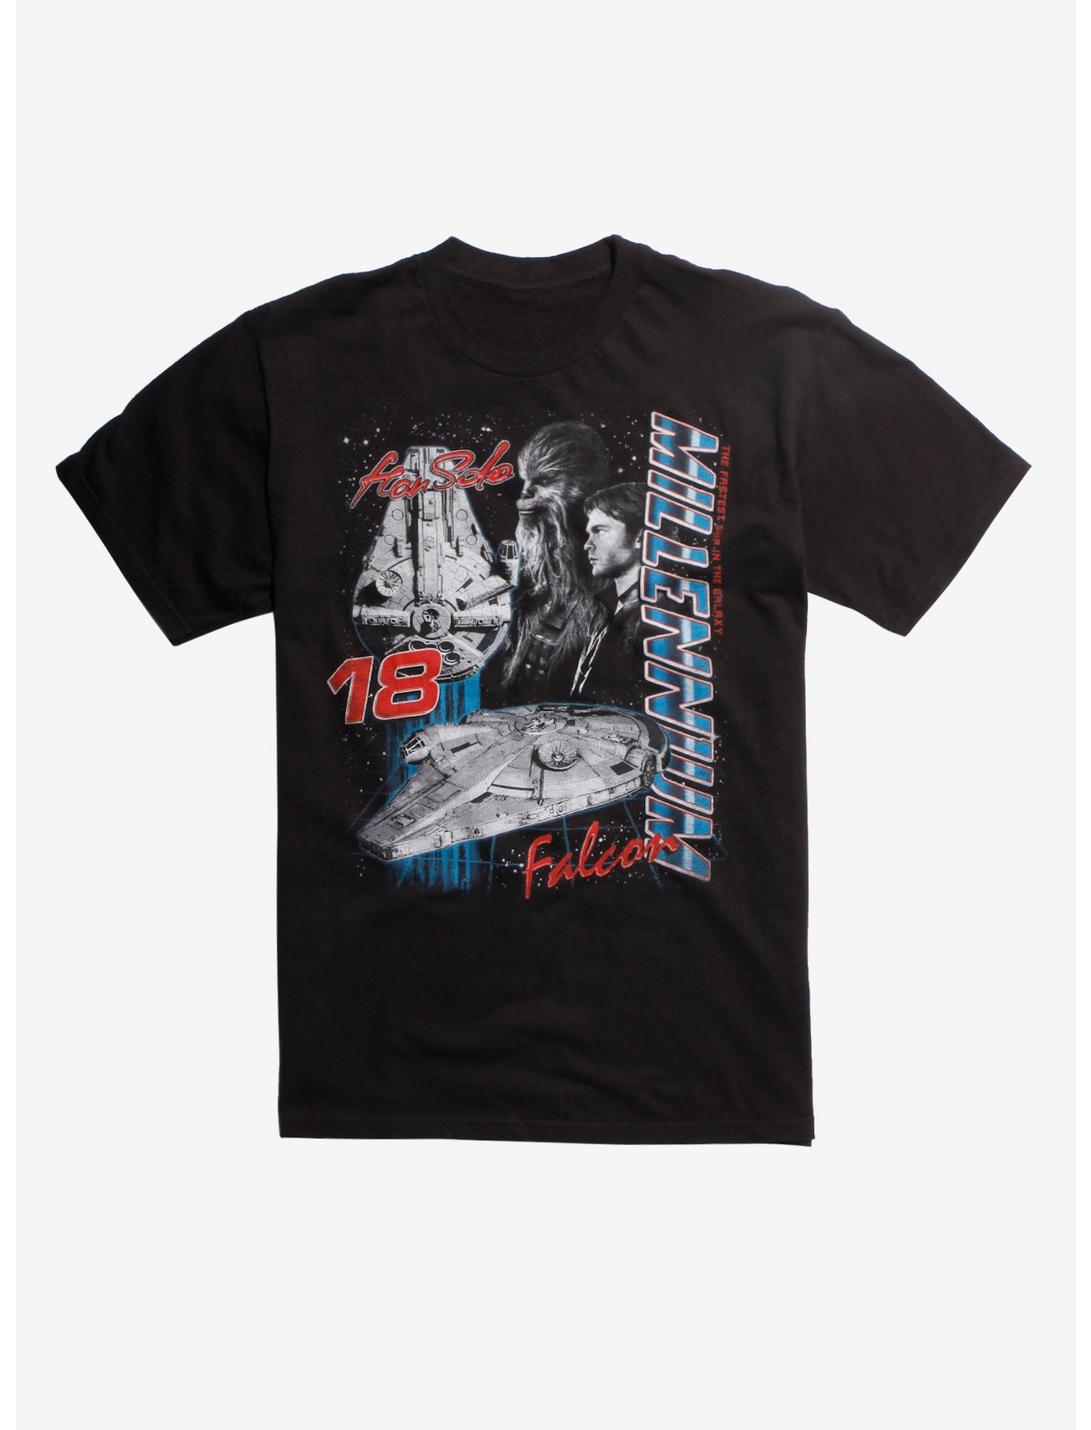 Solo: A Star Wars Story Millennium Falcon Speedway T-Shirt Hot Topic Exclusive, BLACK, hi-res